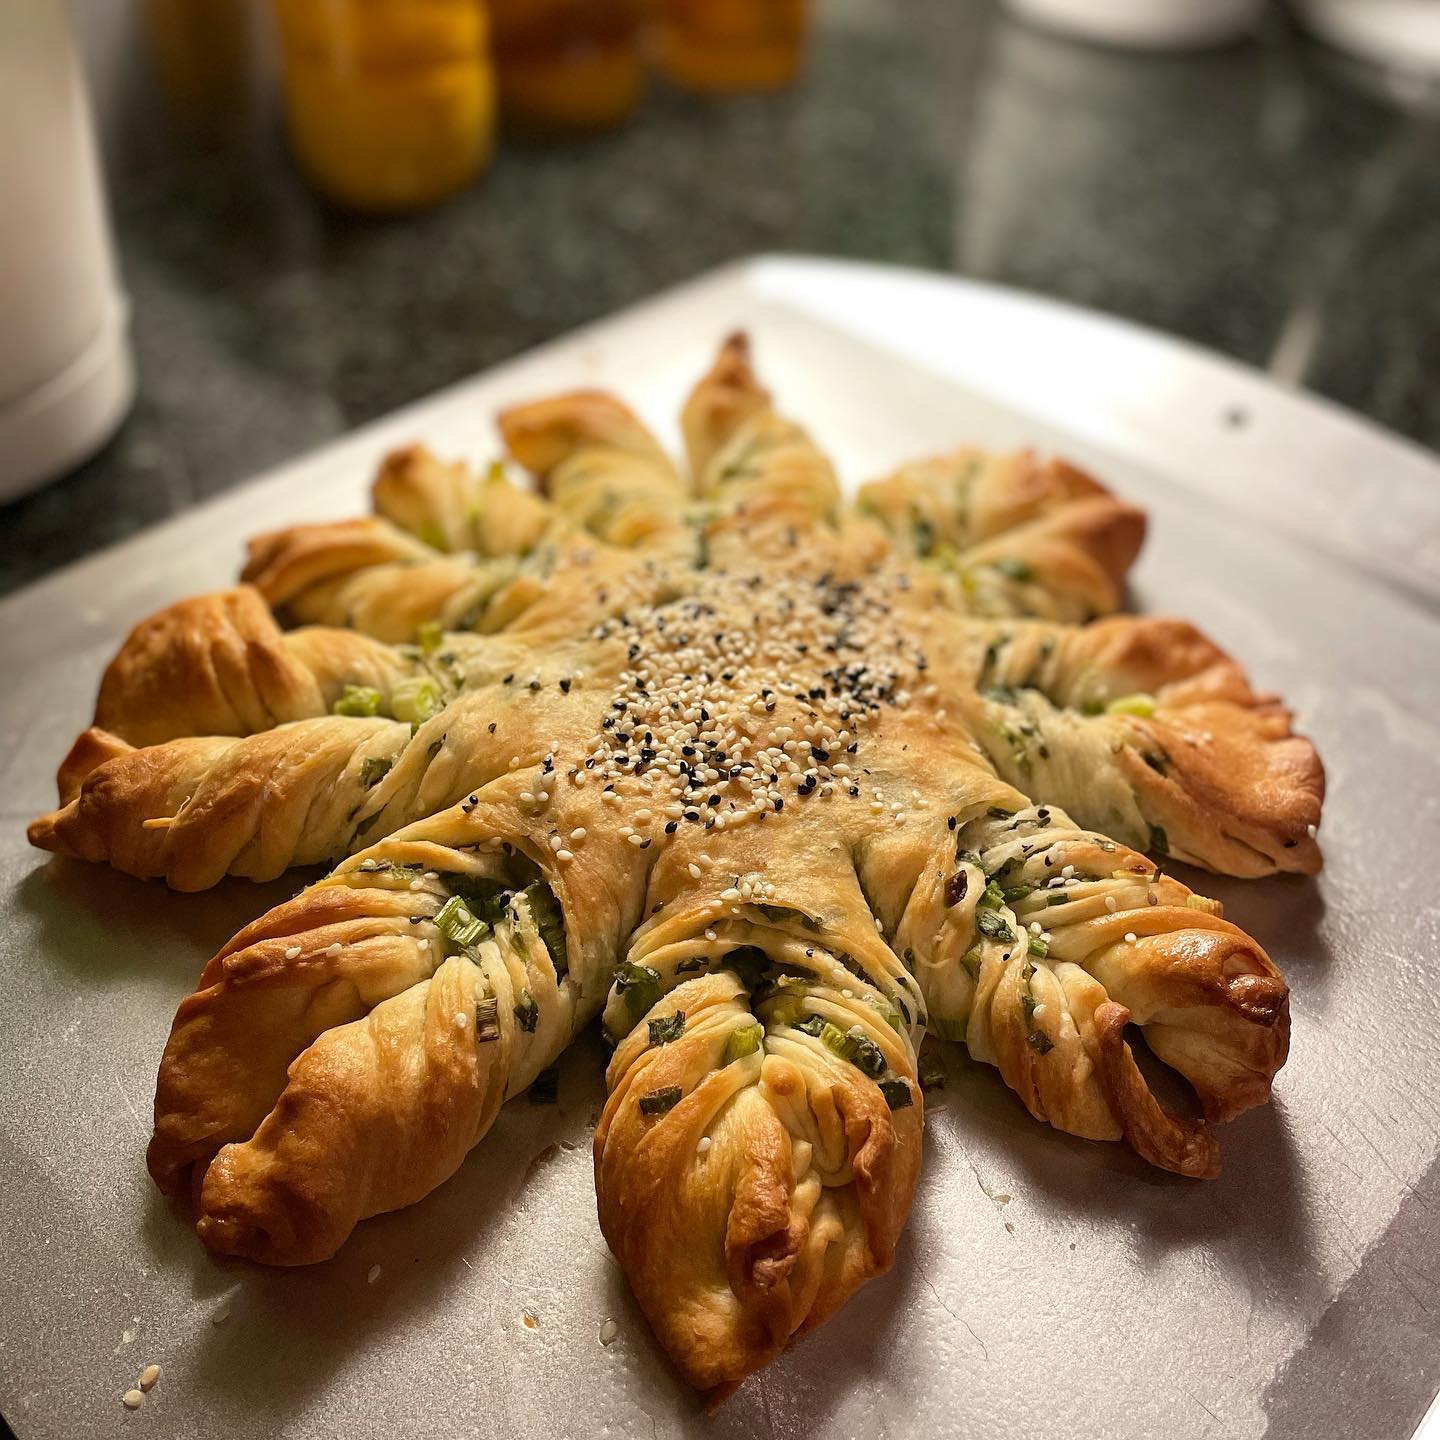 My first bread turned out to be this Scallion Bread shaped like a snowflake. Recipe courtesy of the fabulous @woon.heng. Growing up, one of my favorite foods was my Mom’s cong you bing, Cantonese scallion pancakes with layers of crunchy goodness. This has the same feeling but also tastes like a scallion croissant... delicious.